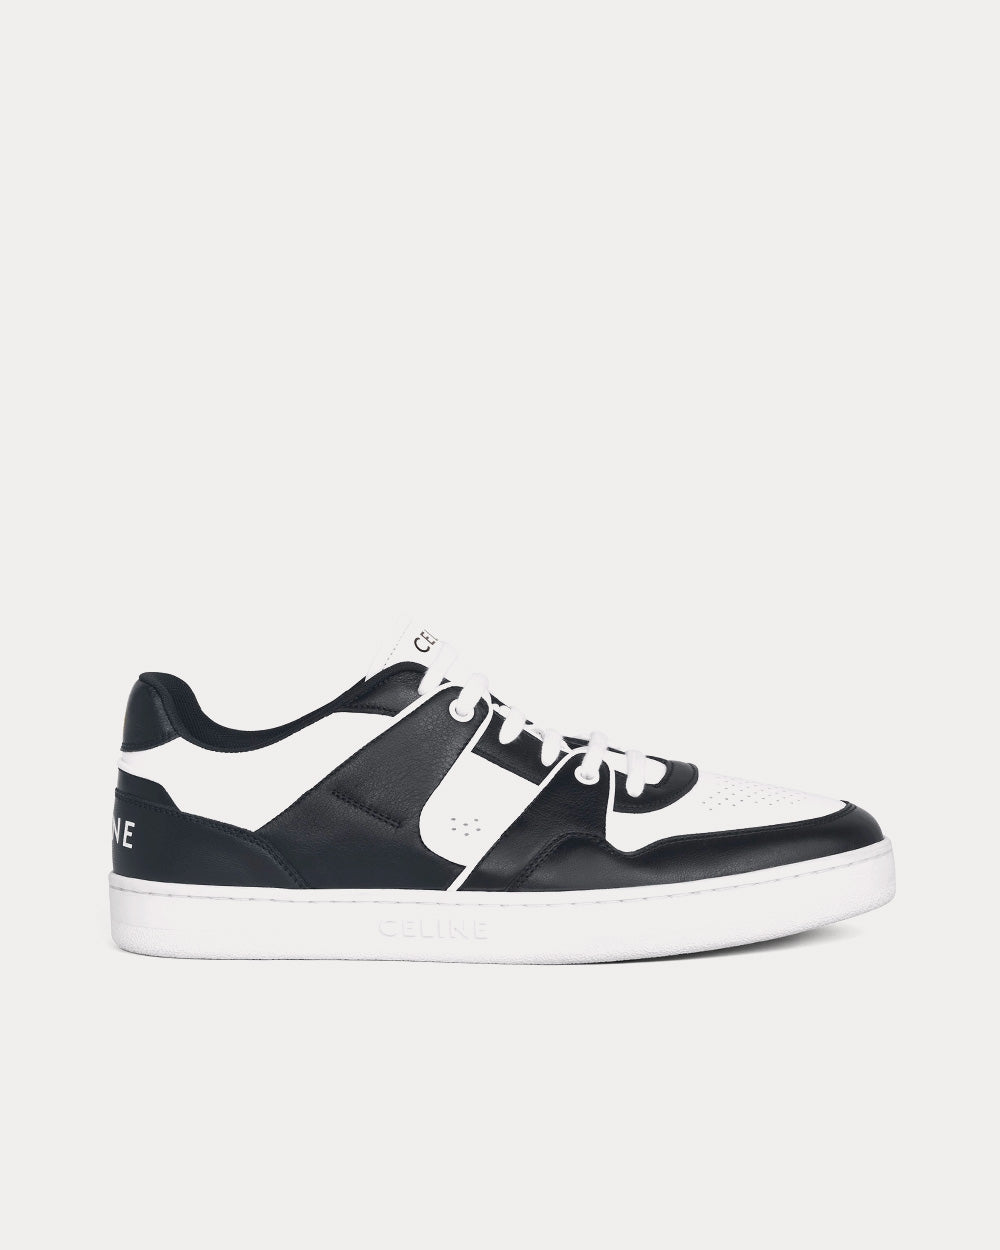 Celine - CT-04 Leather White / Black Low Top Sneakers